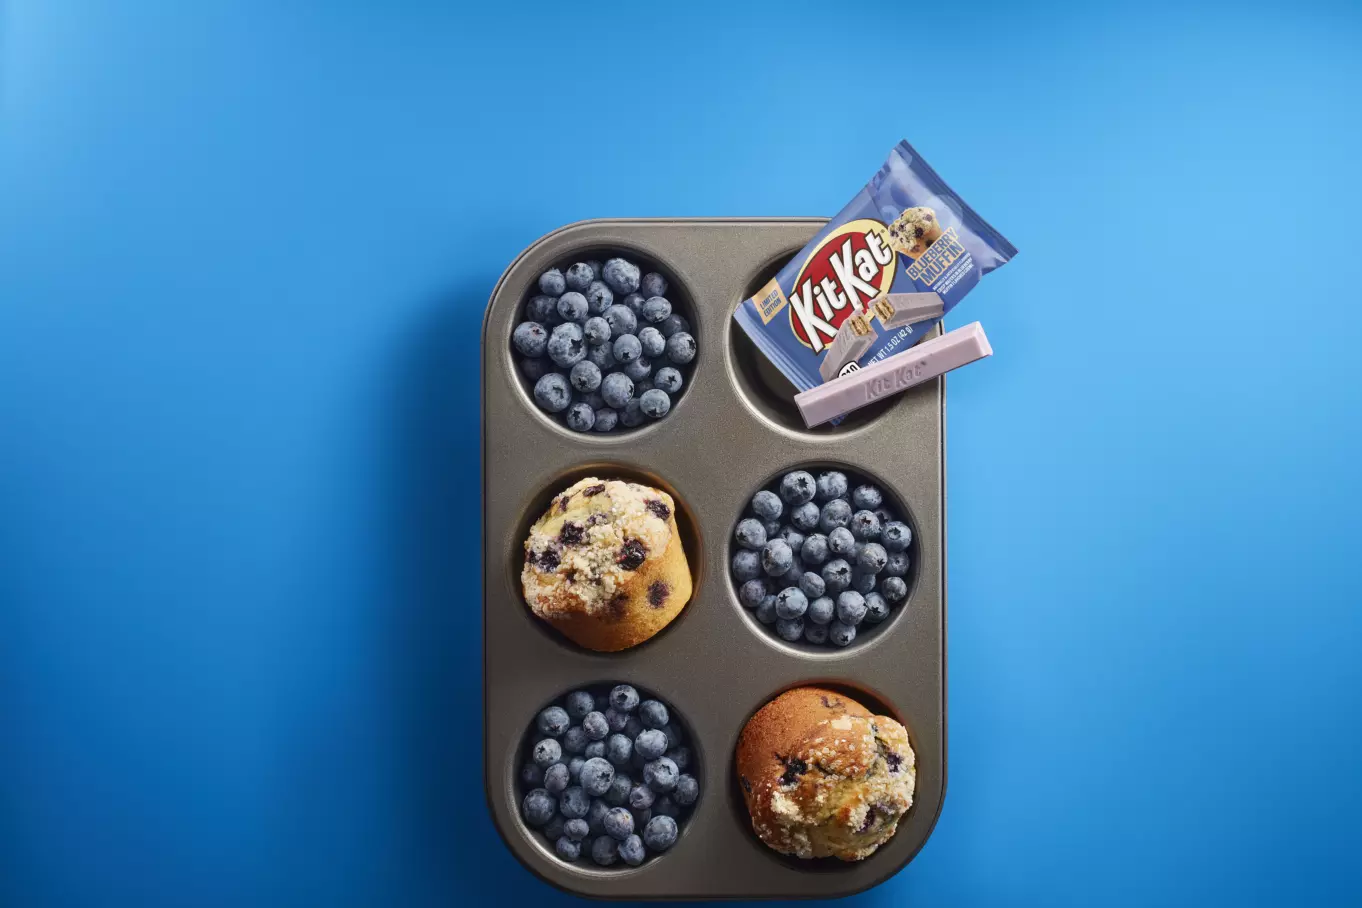 KIT KAT® Candy Bar inside muffin tin with blueberries and muffins